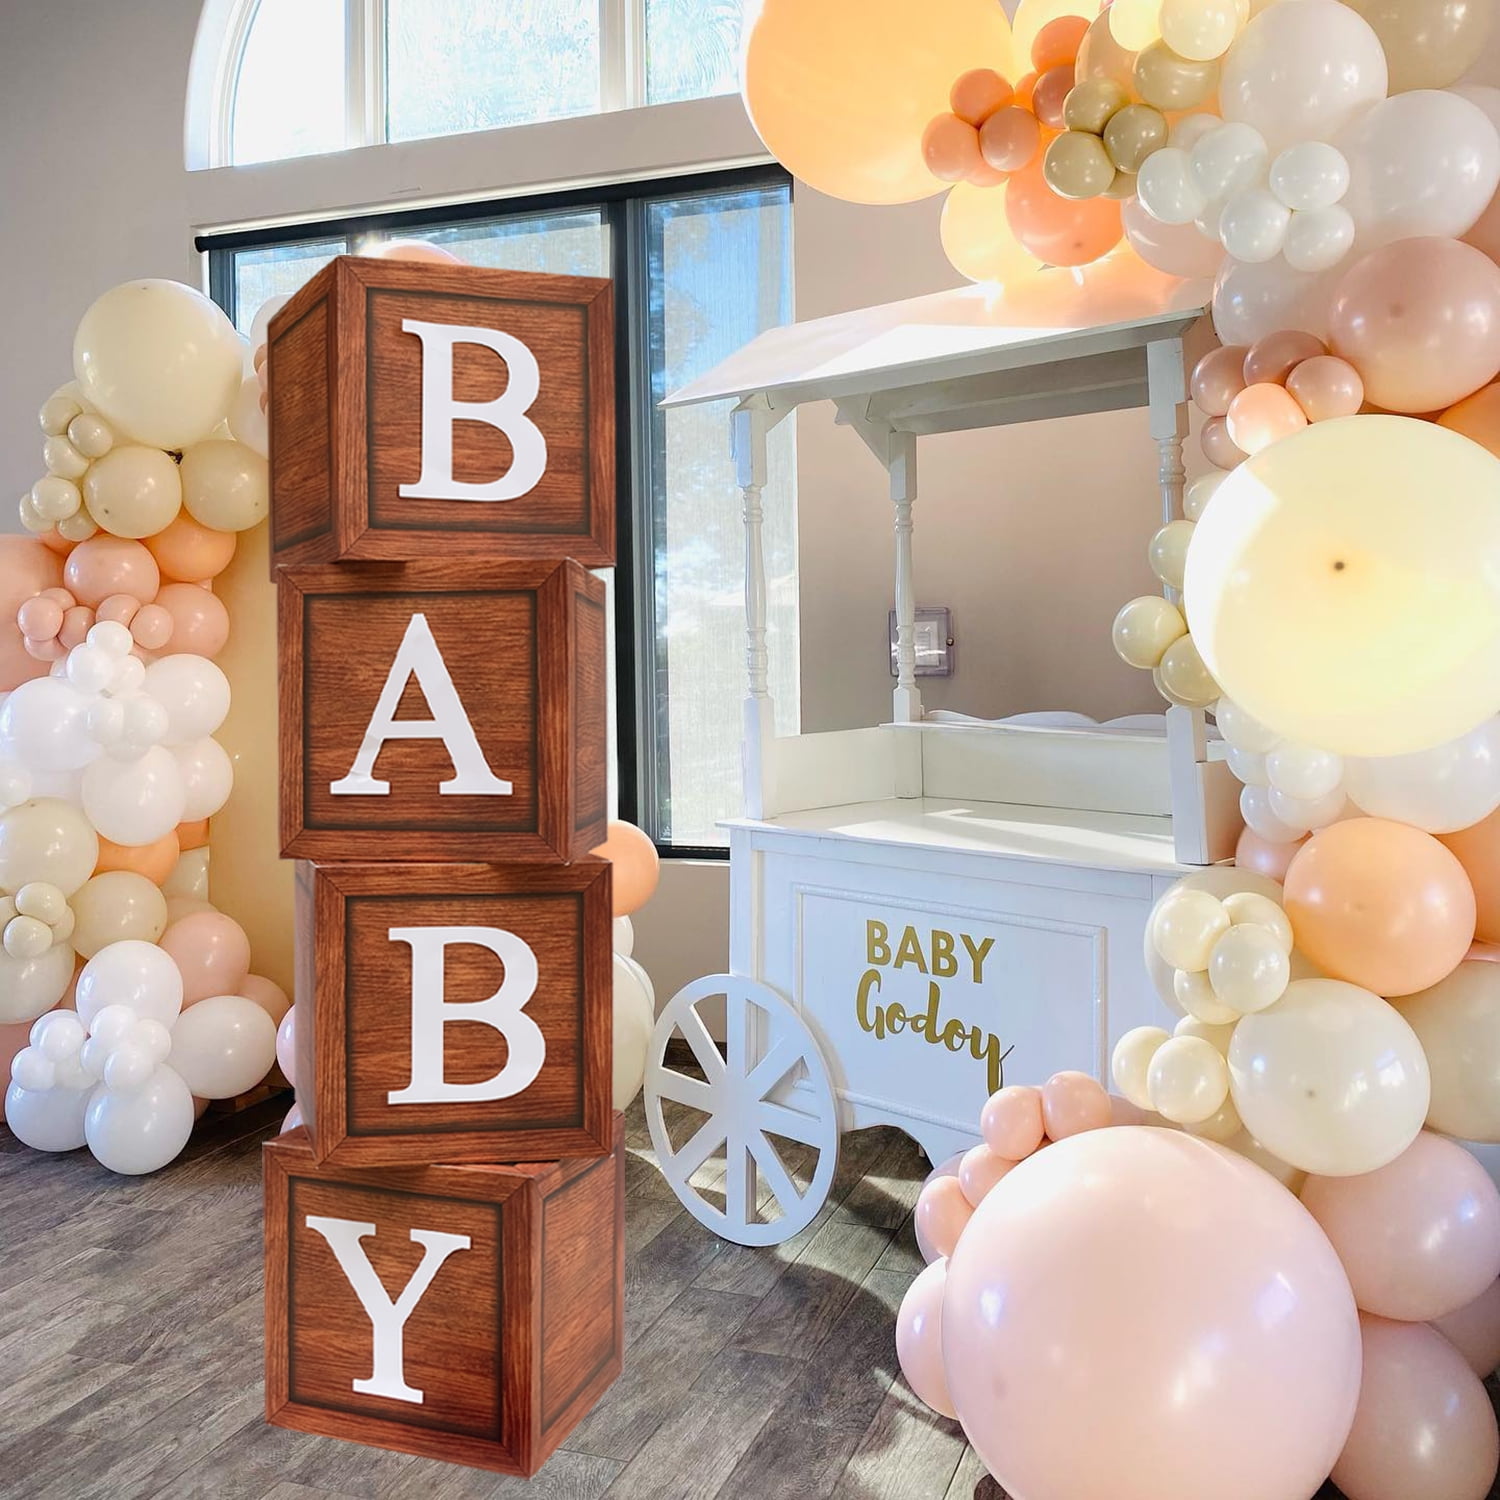 Baby Shower Boxes Balloons Decorations CUTEUP Baby Boxes with Letters for Boy Girl Baby Shower/ Gender Reveal/ Birthday Baby Boxes Decorations with with 4 Pcs Clear Baby Blocks and 8 Pcs letters 